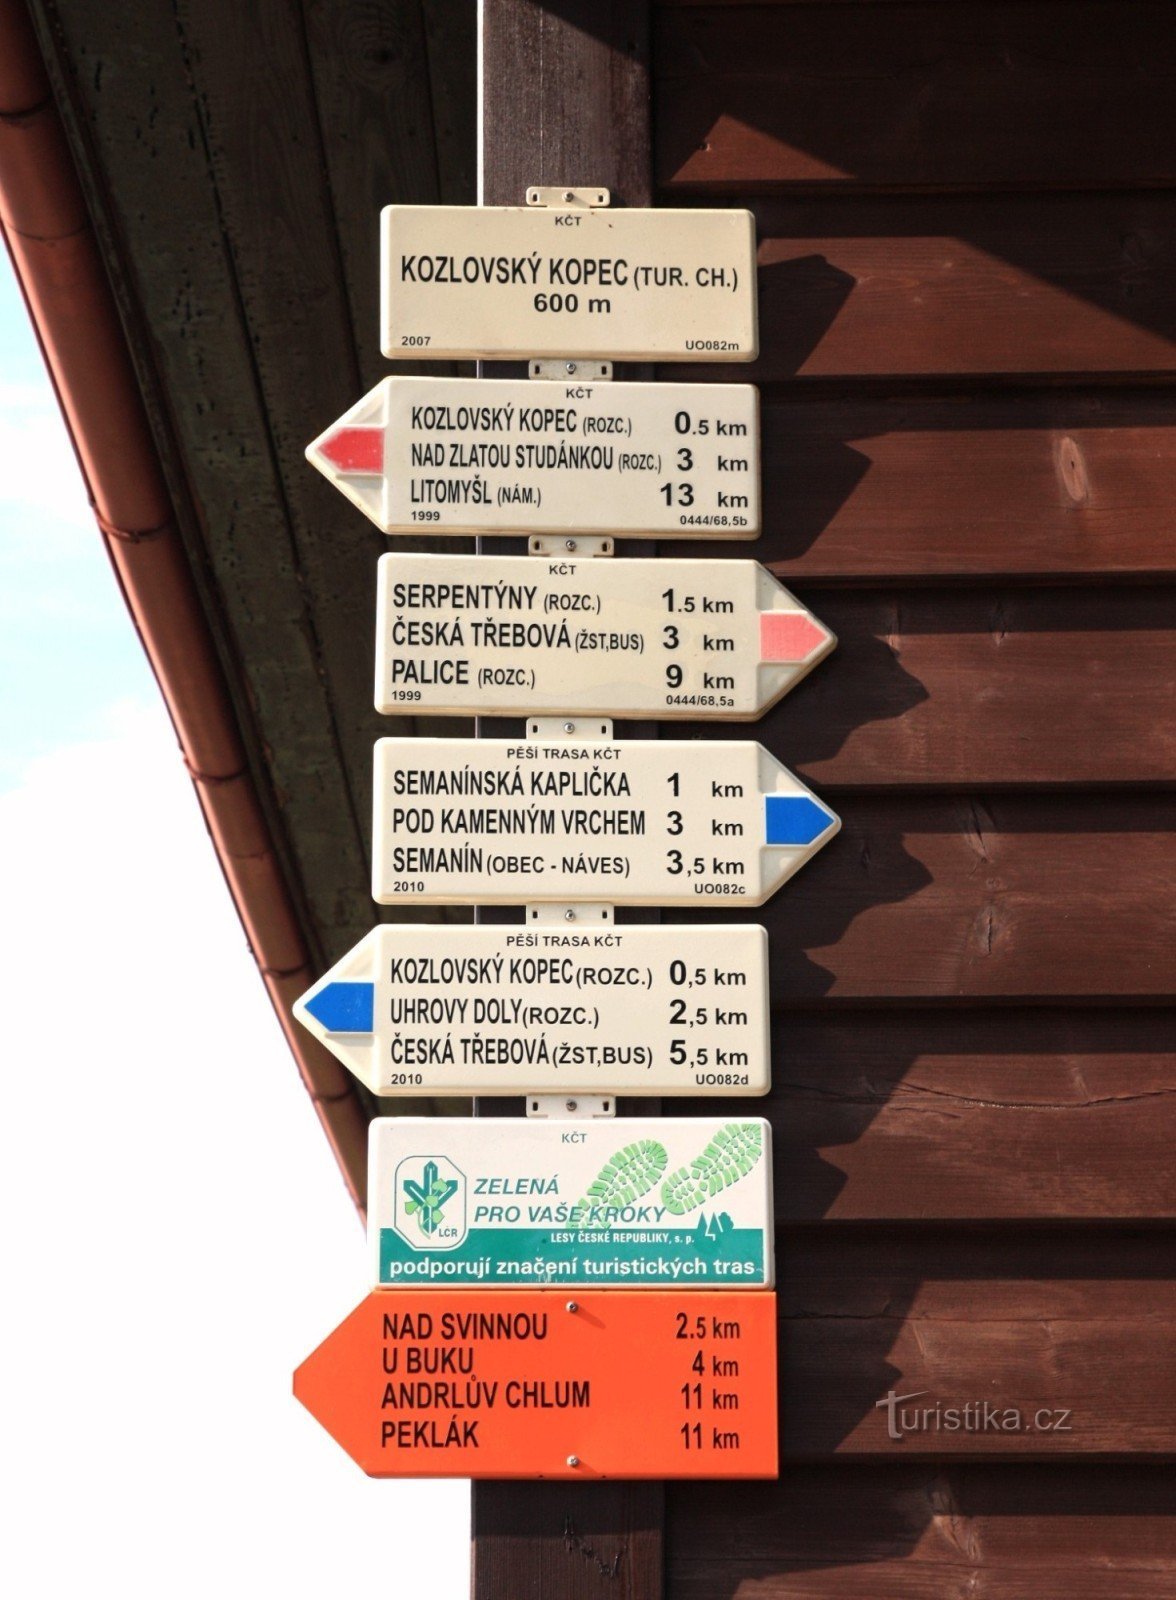 Signposts at the cottage